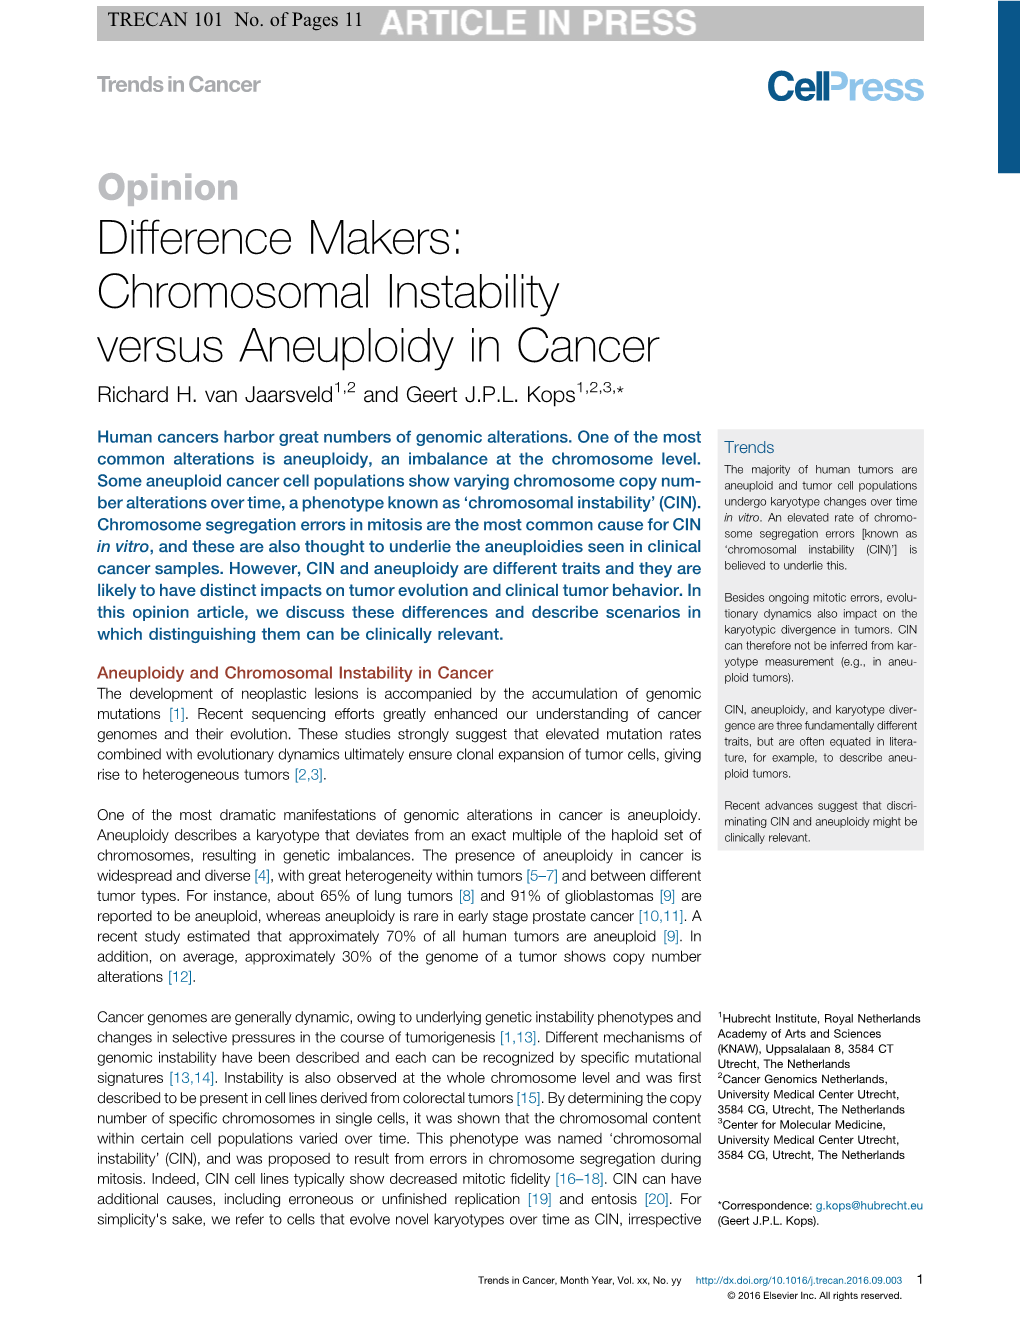 Chromosomal Instability Versus Aneuploidy in Cancer